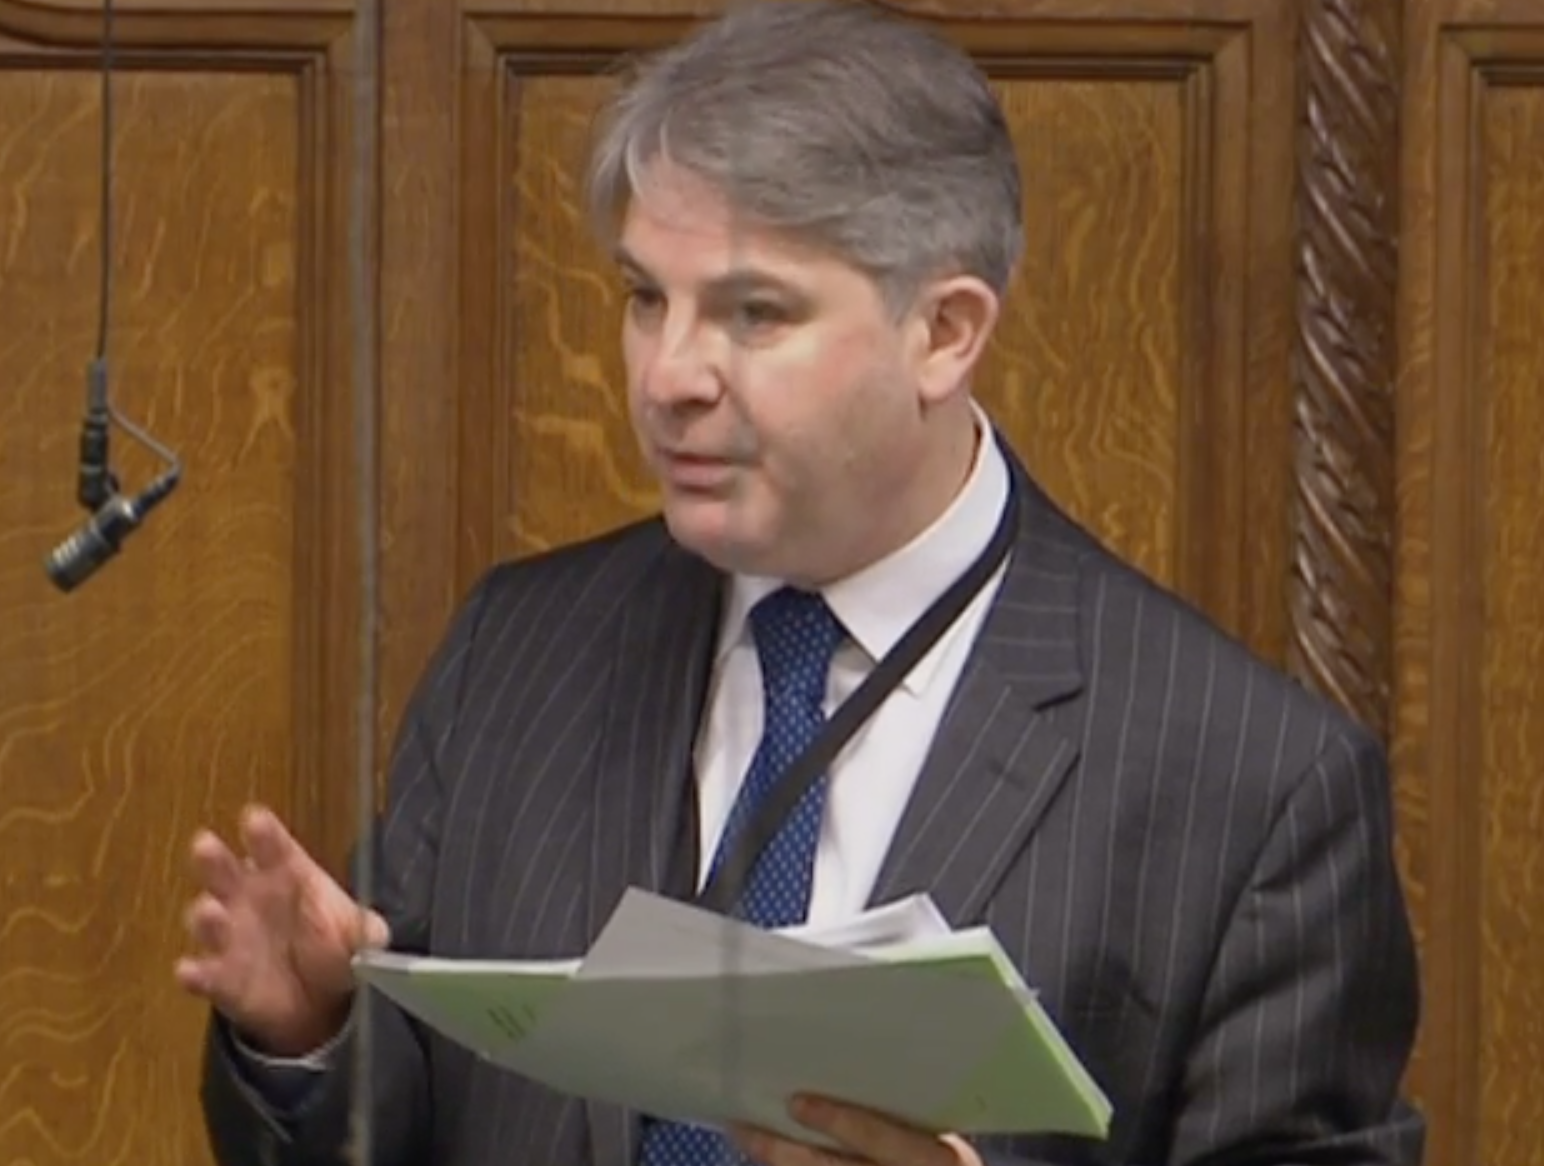 Conservative MP Philip Davies has a reputation for filibustering bills he doesn't like